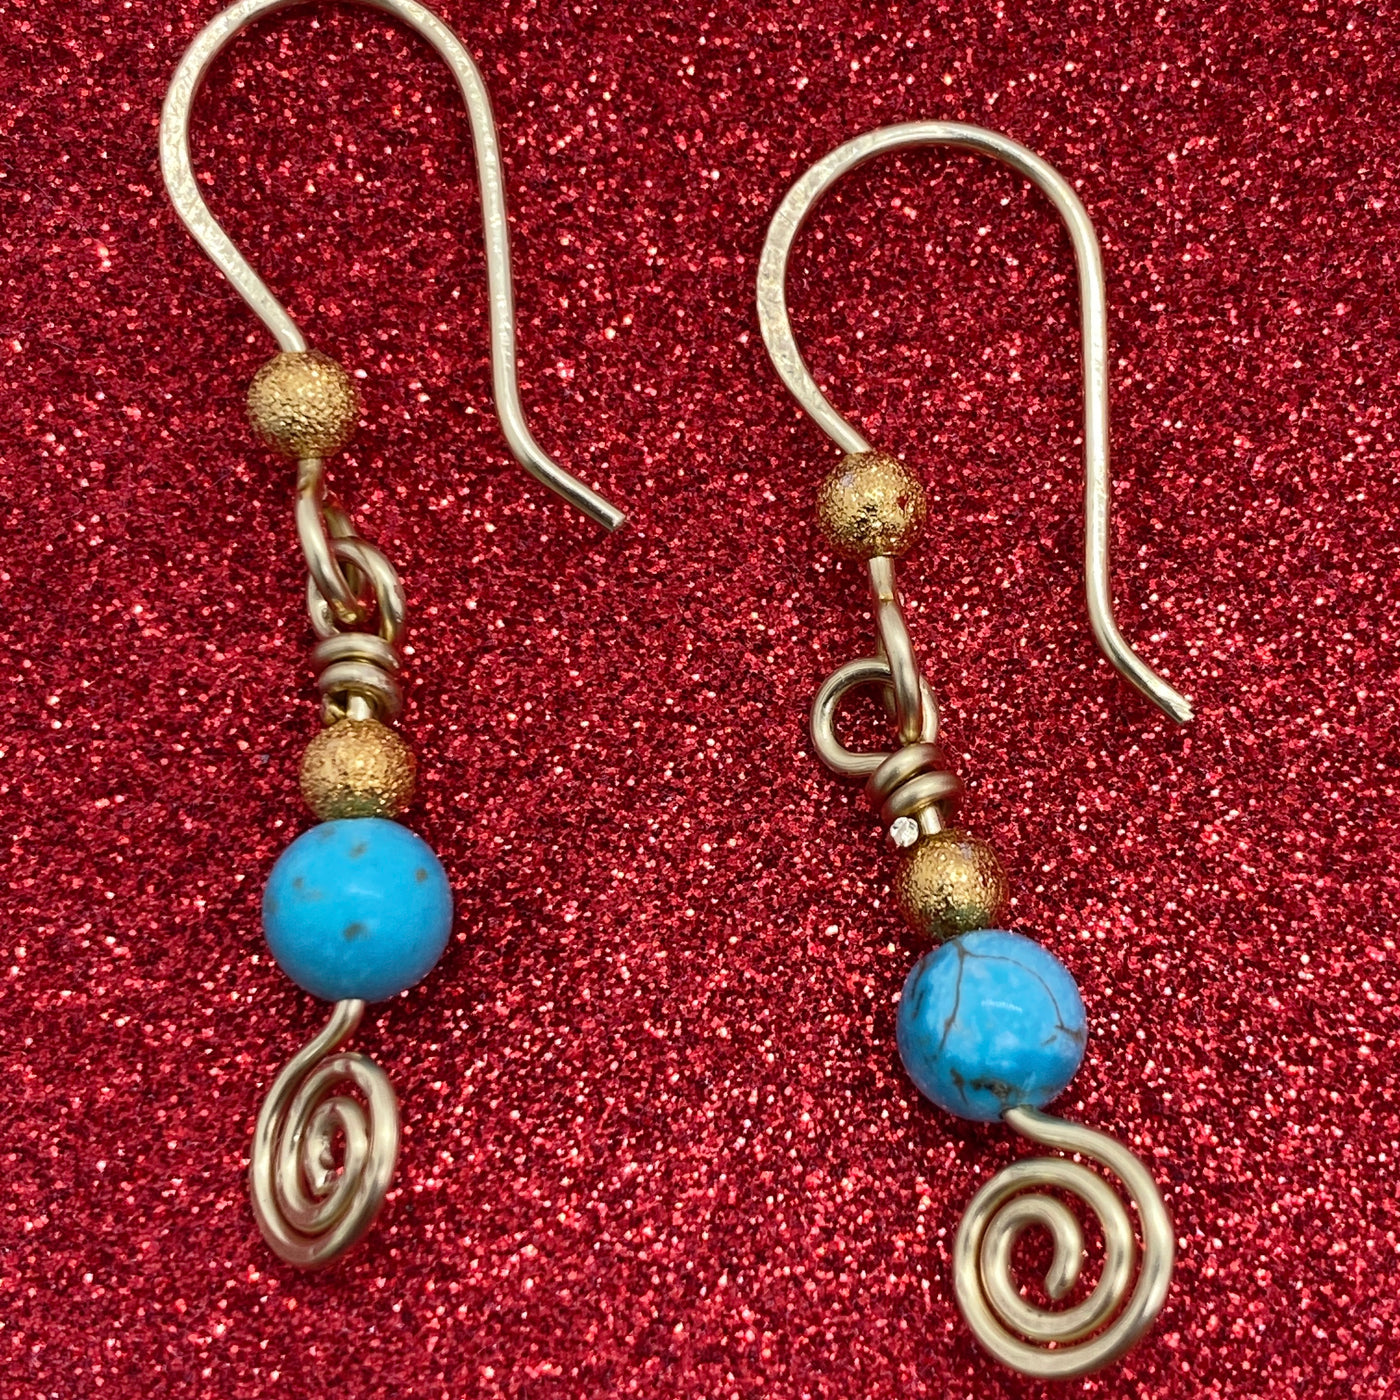 Turquoise and brass earrings